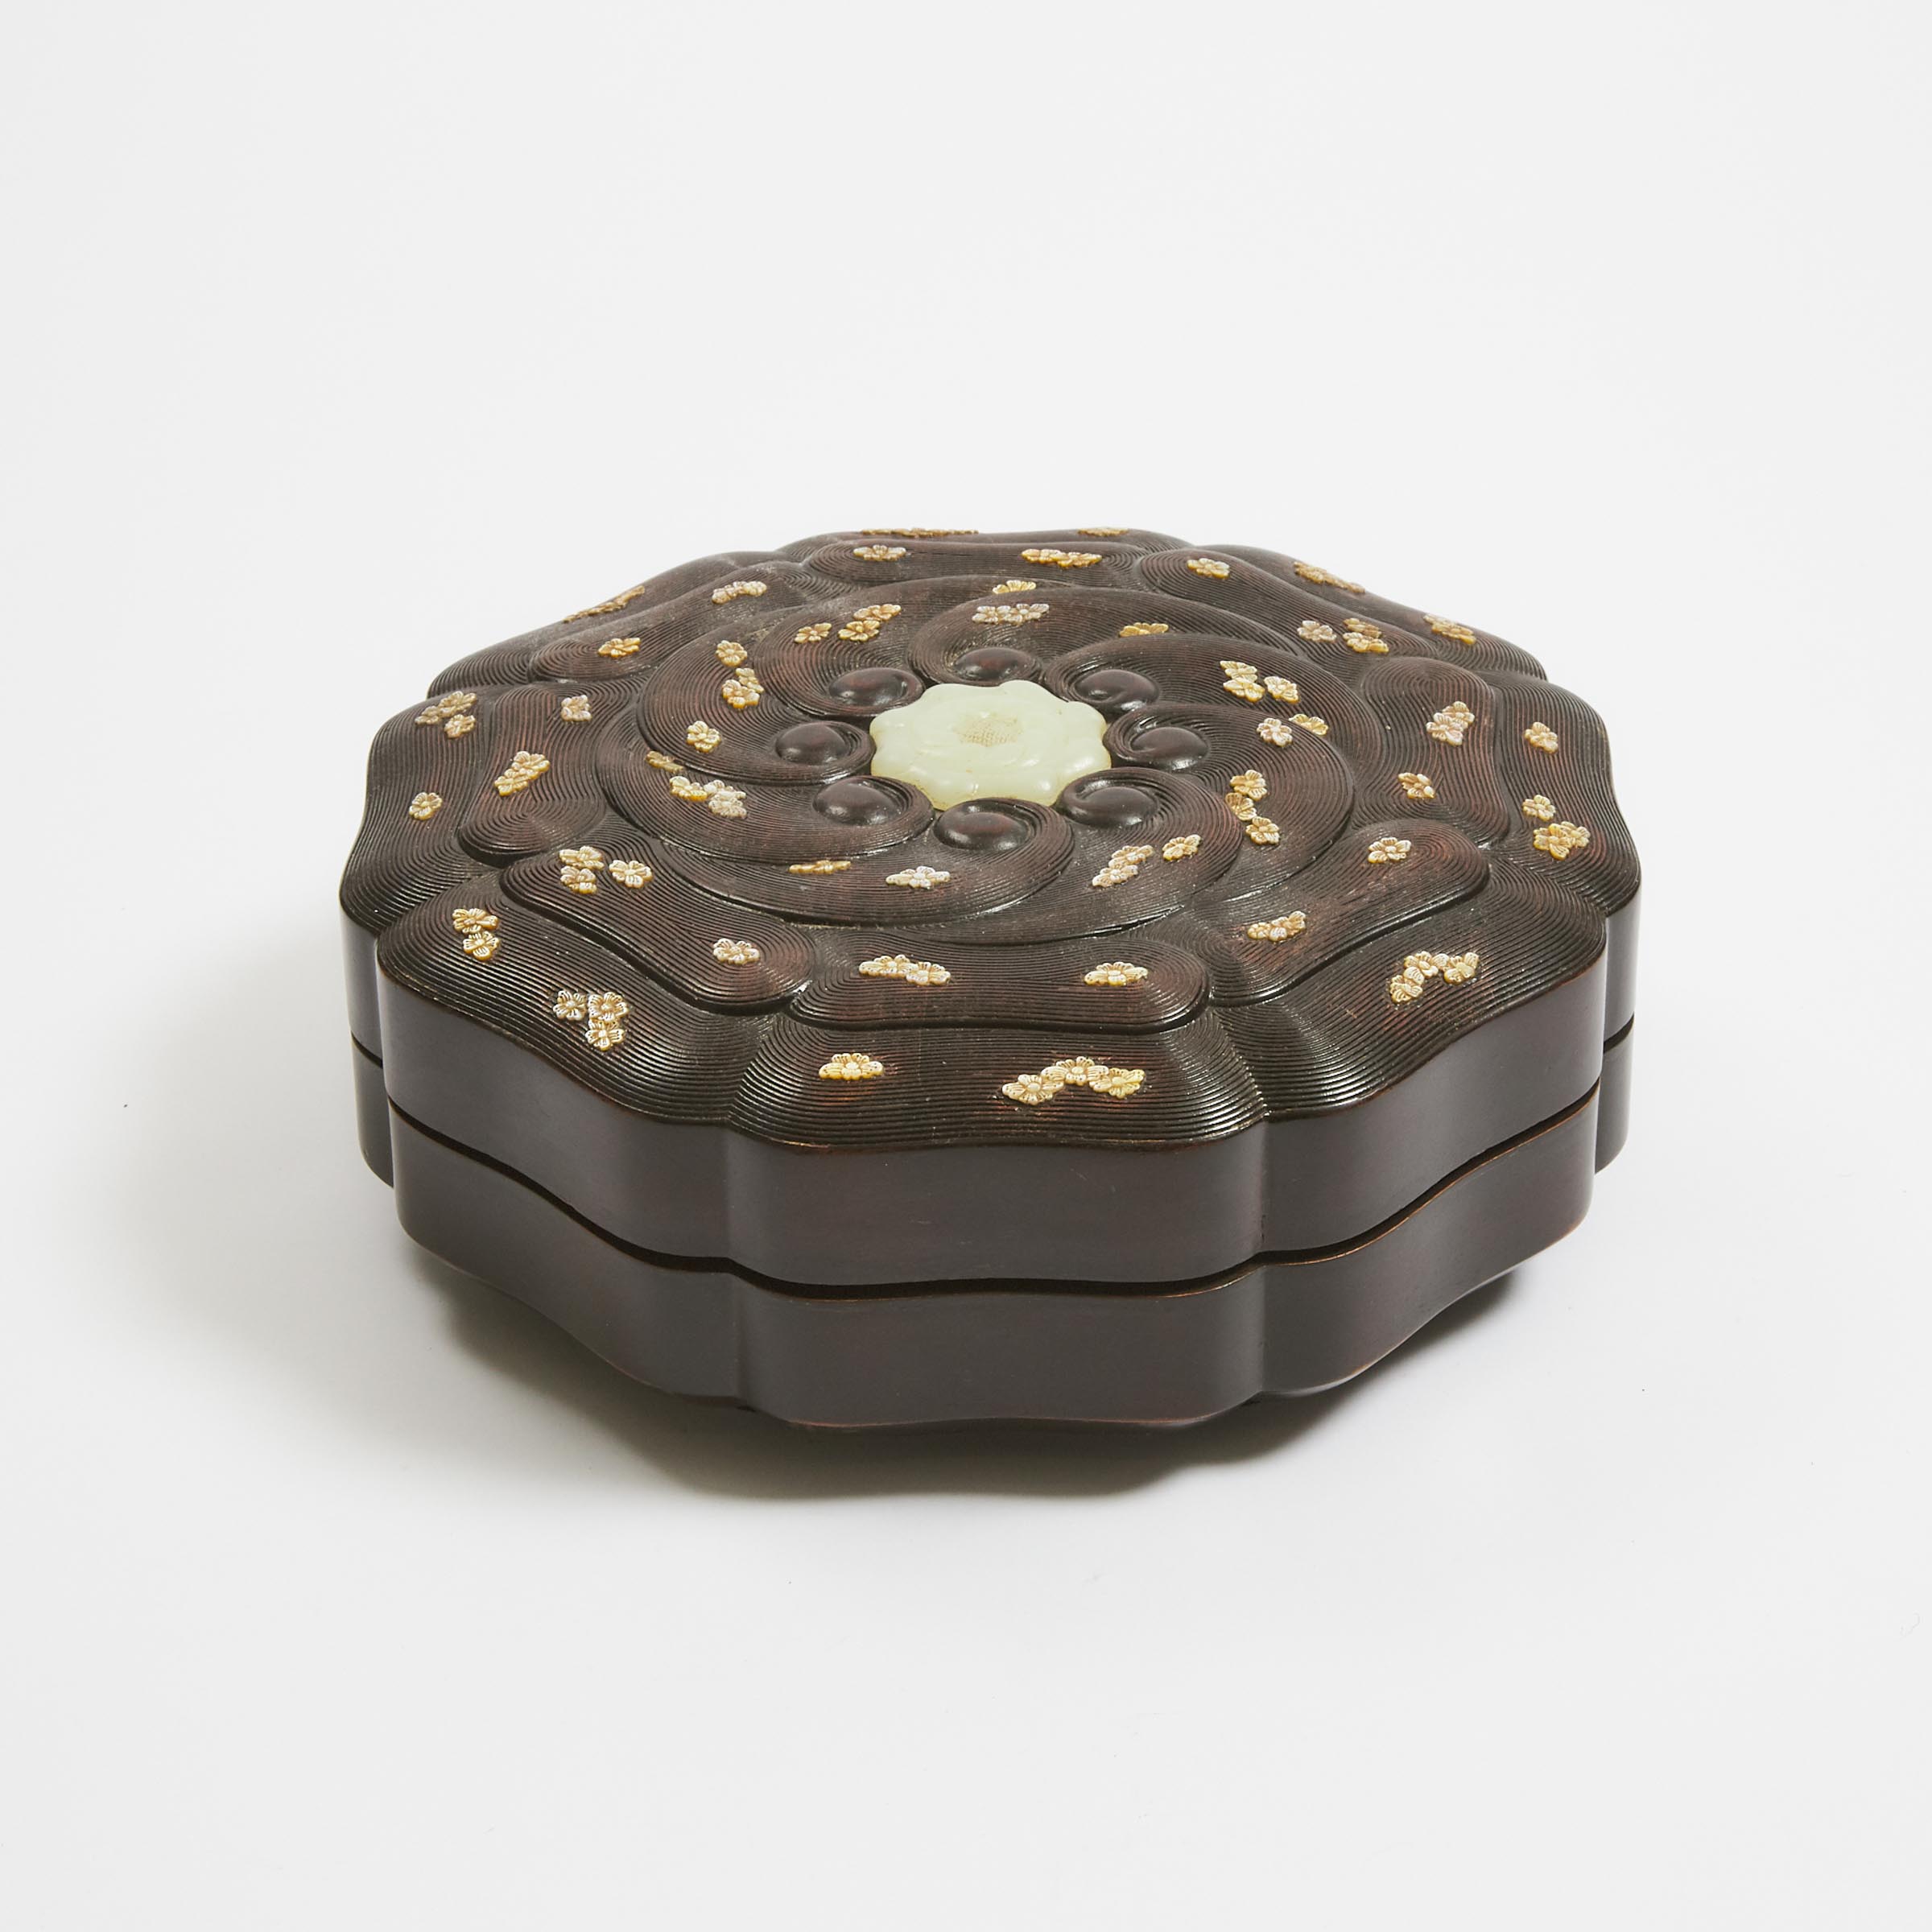 A White Jade and Mother-of-Pearl Inlaid Zitan Box and Cover, 20th Century